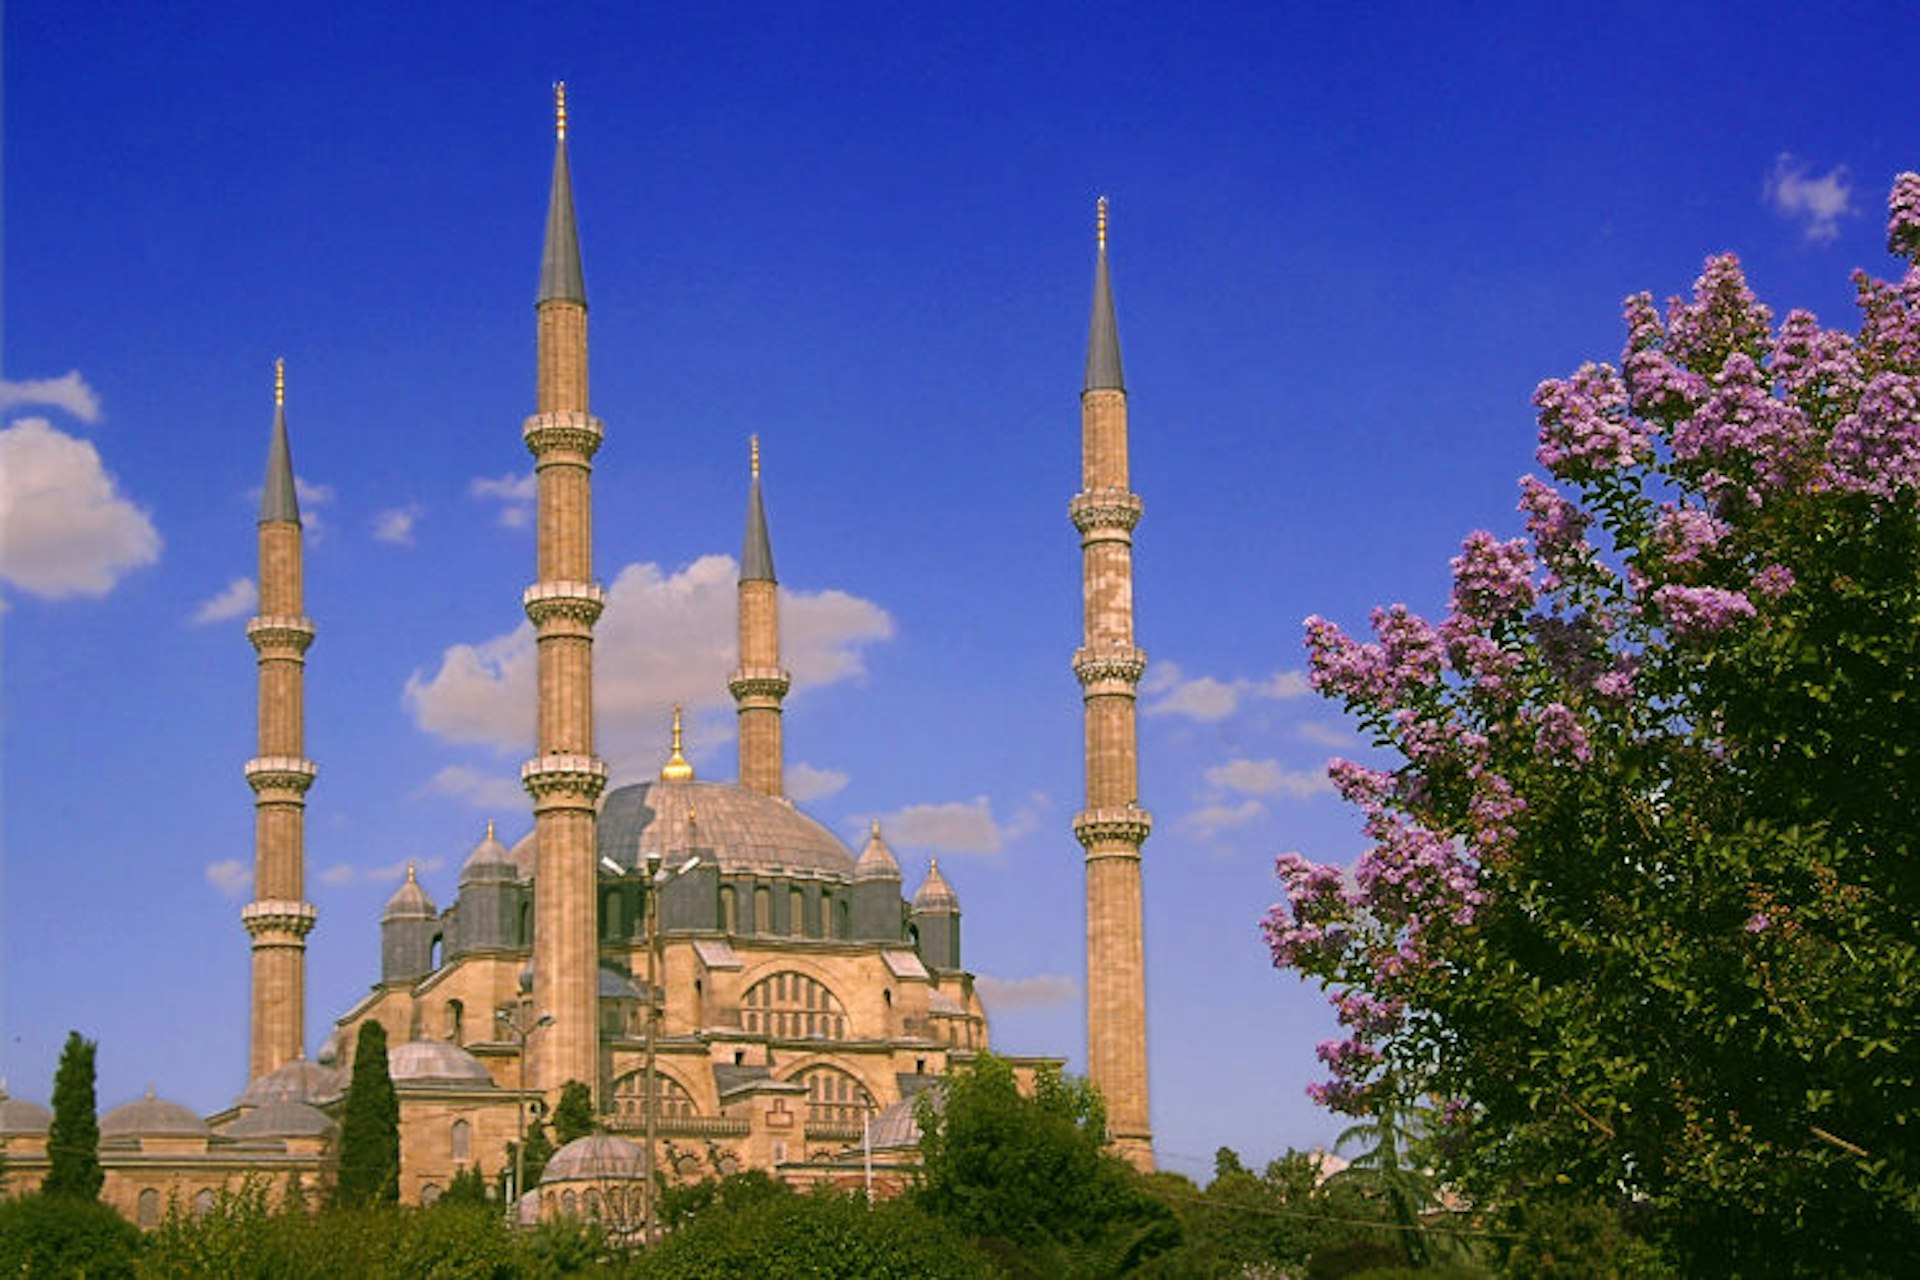 The beautiful Selimiye mosque in Edirne. Image by J.D. Dallet / age fotostock / Getty Images